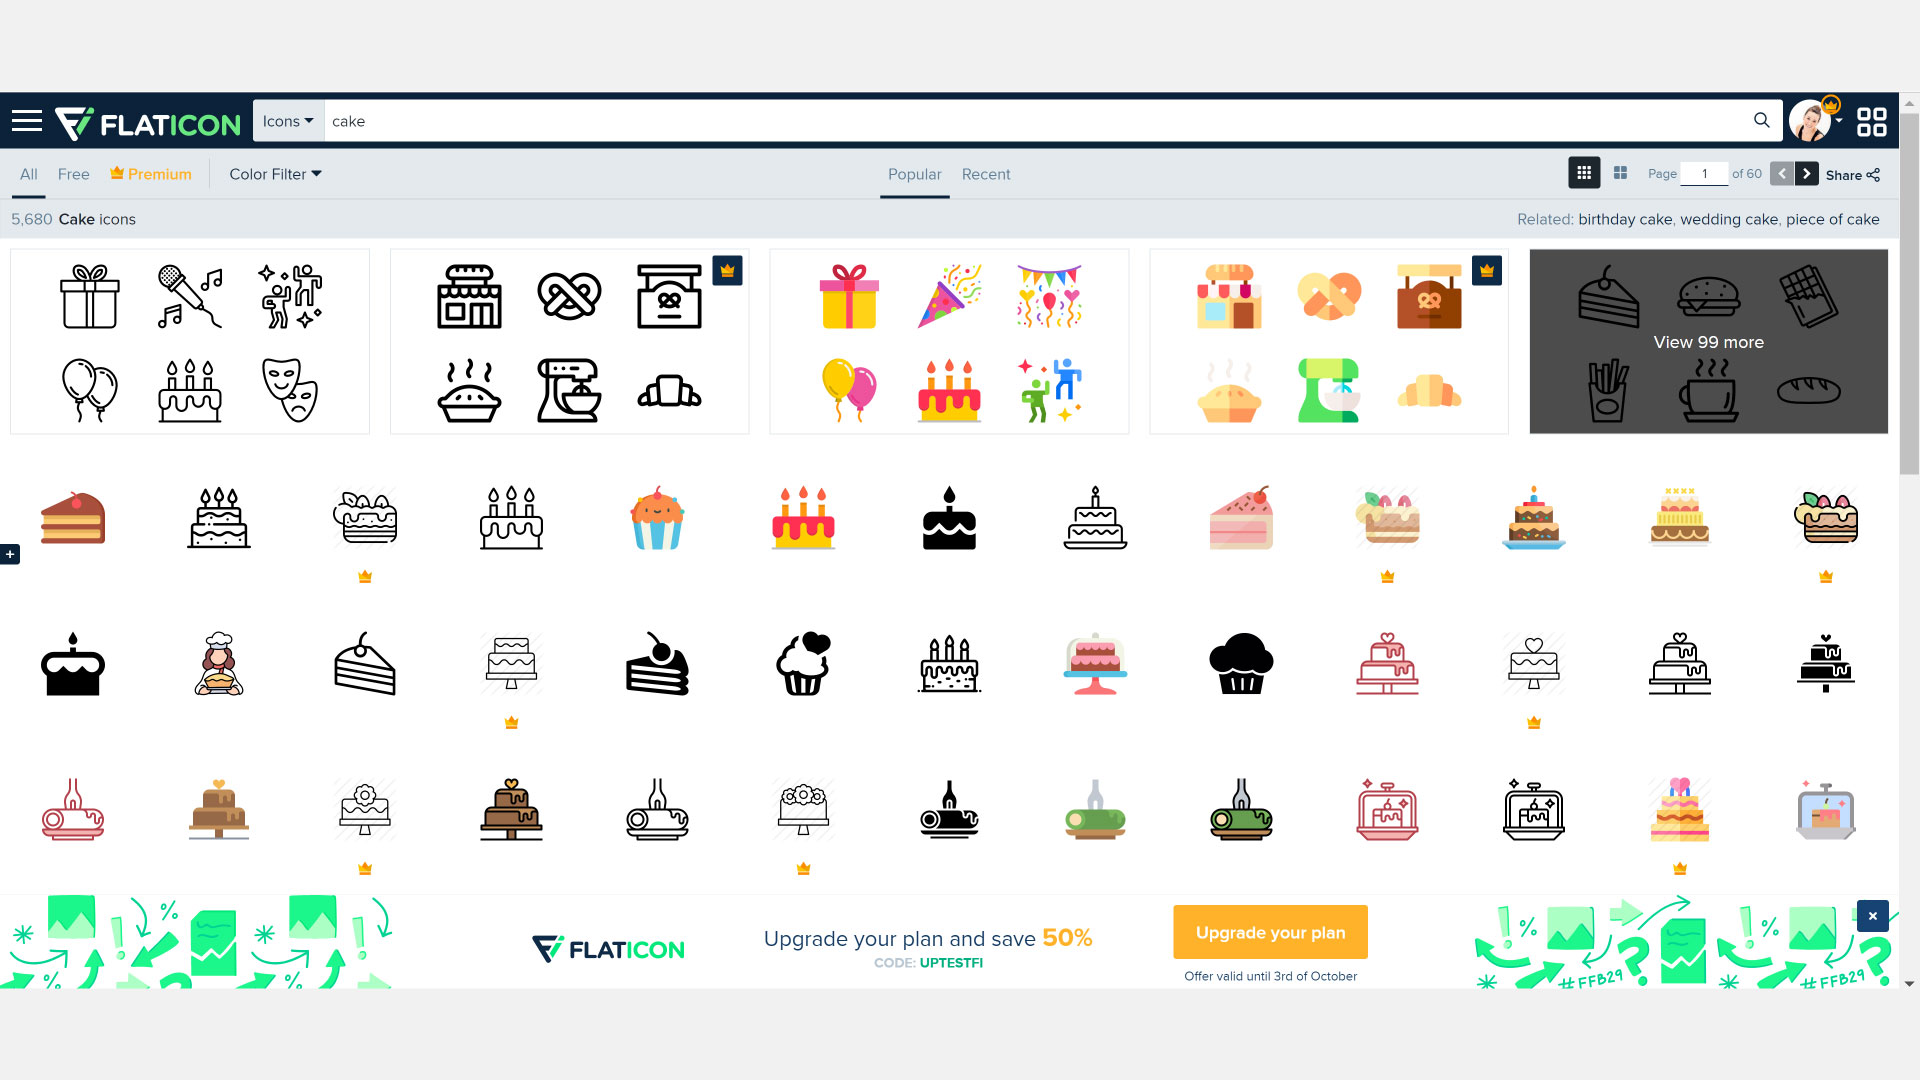 Search Flaticon for vector-based free icons to add to your website